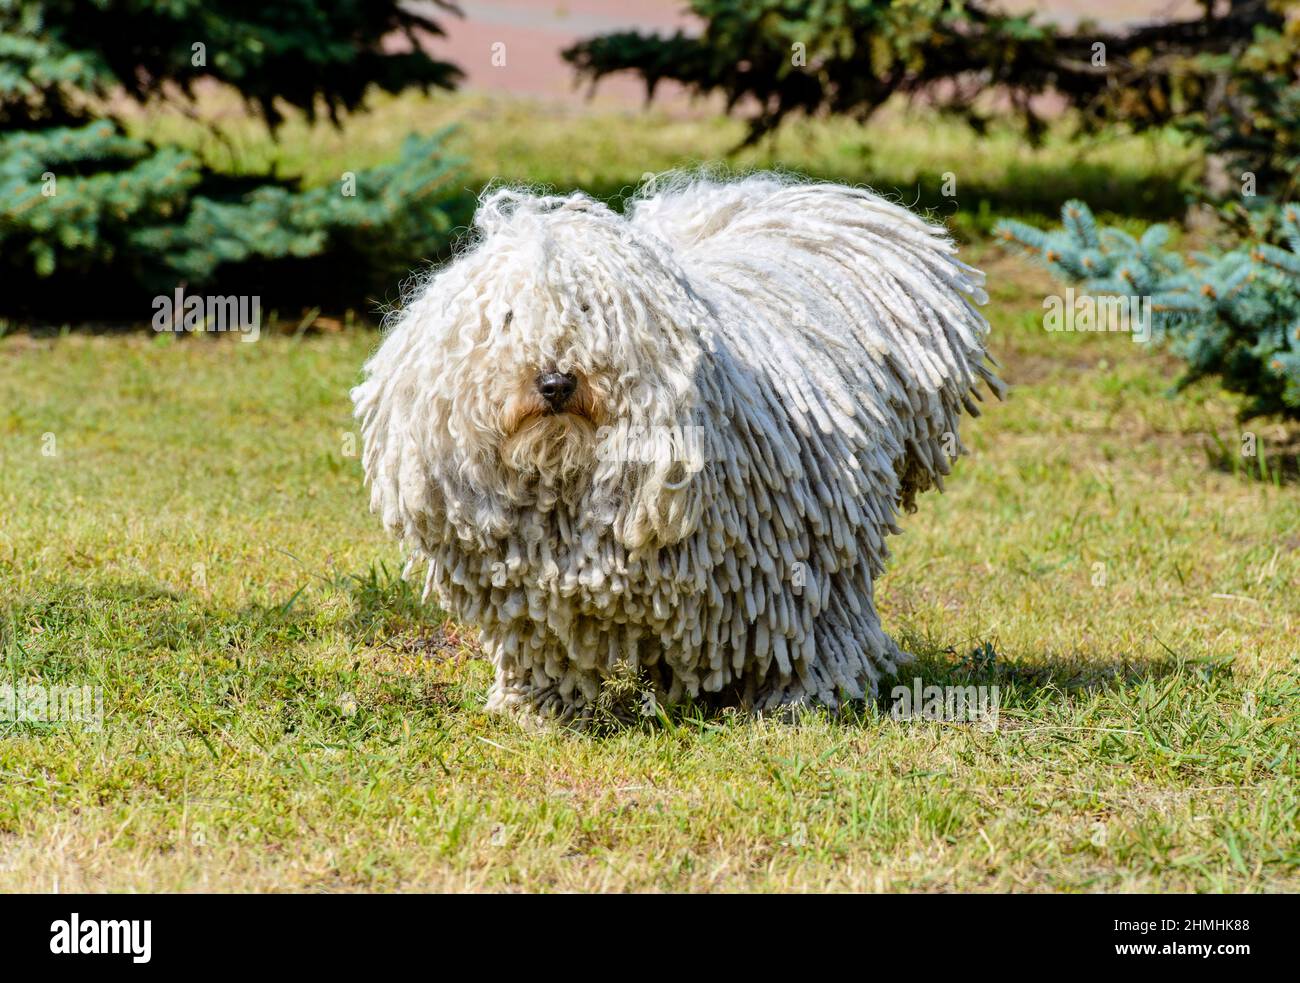 Puli in full face. The Puli stands on the grass in the park. Stock Photo